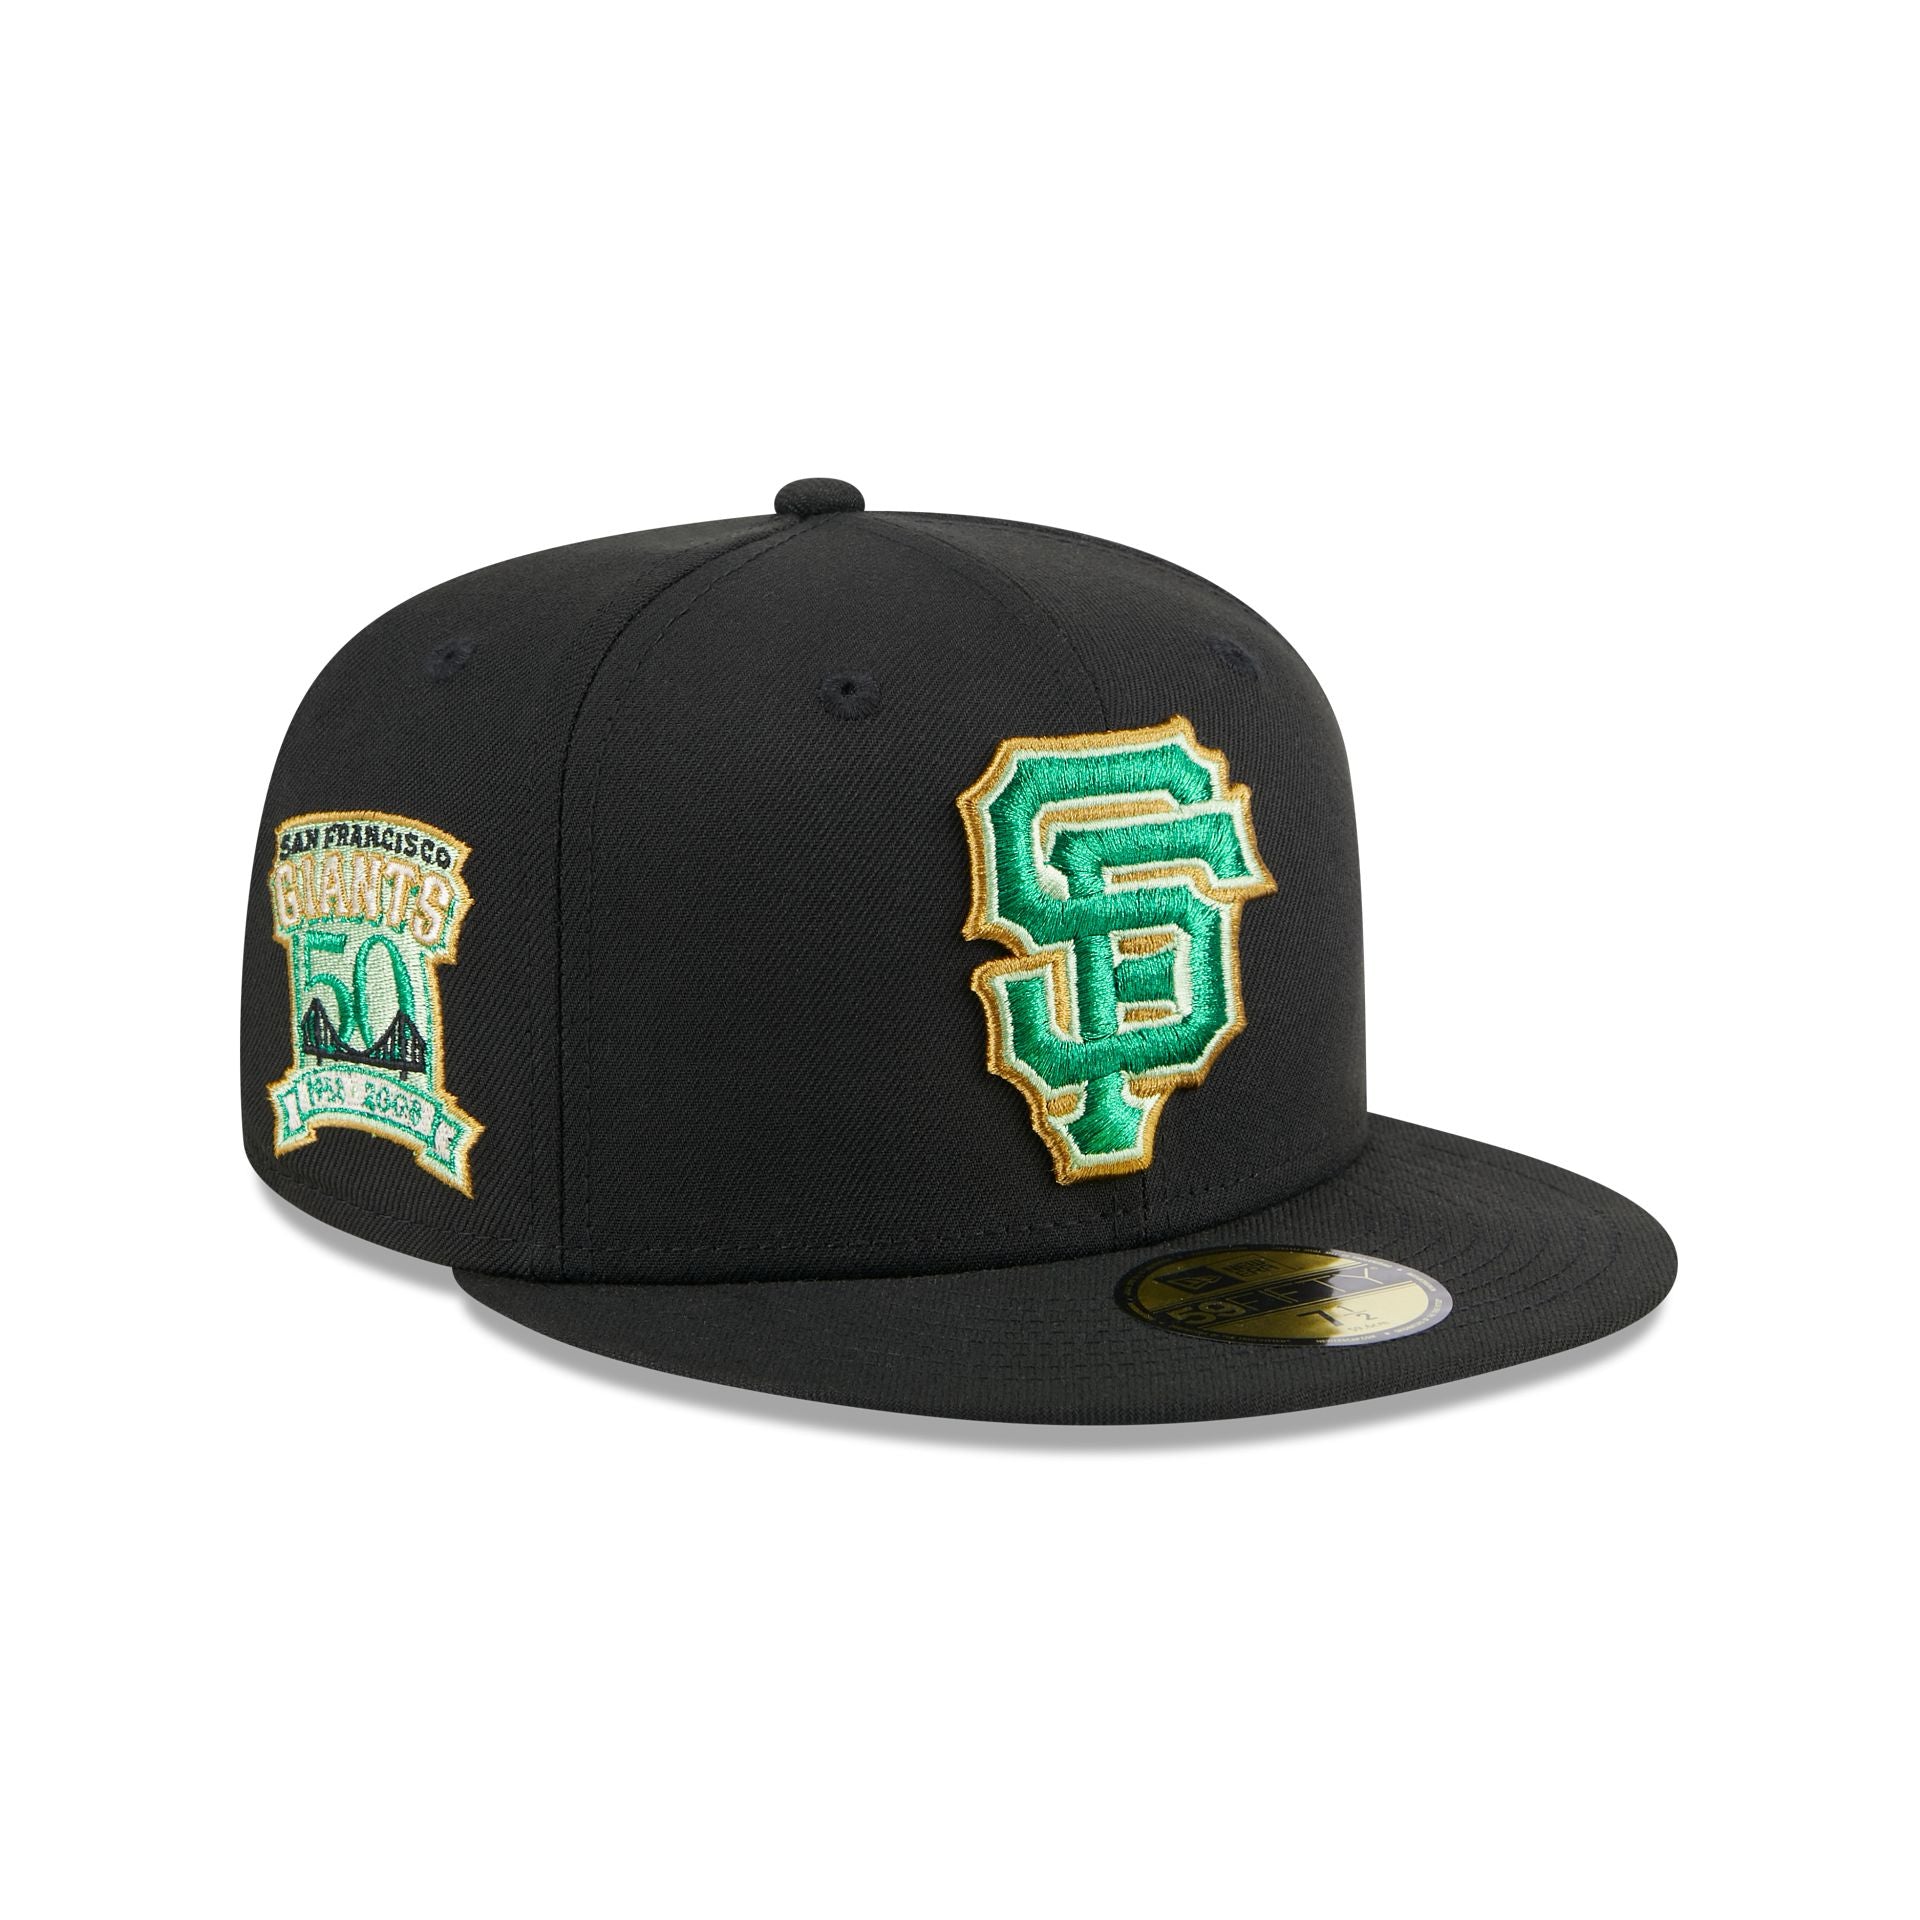 San Francisco Giants Metallic Green Pop 59FIFTY Fitted Hat, Black - Size: 8, MLB by New Era